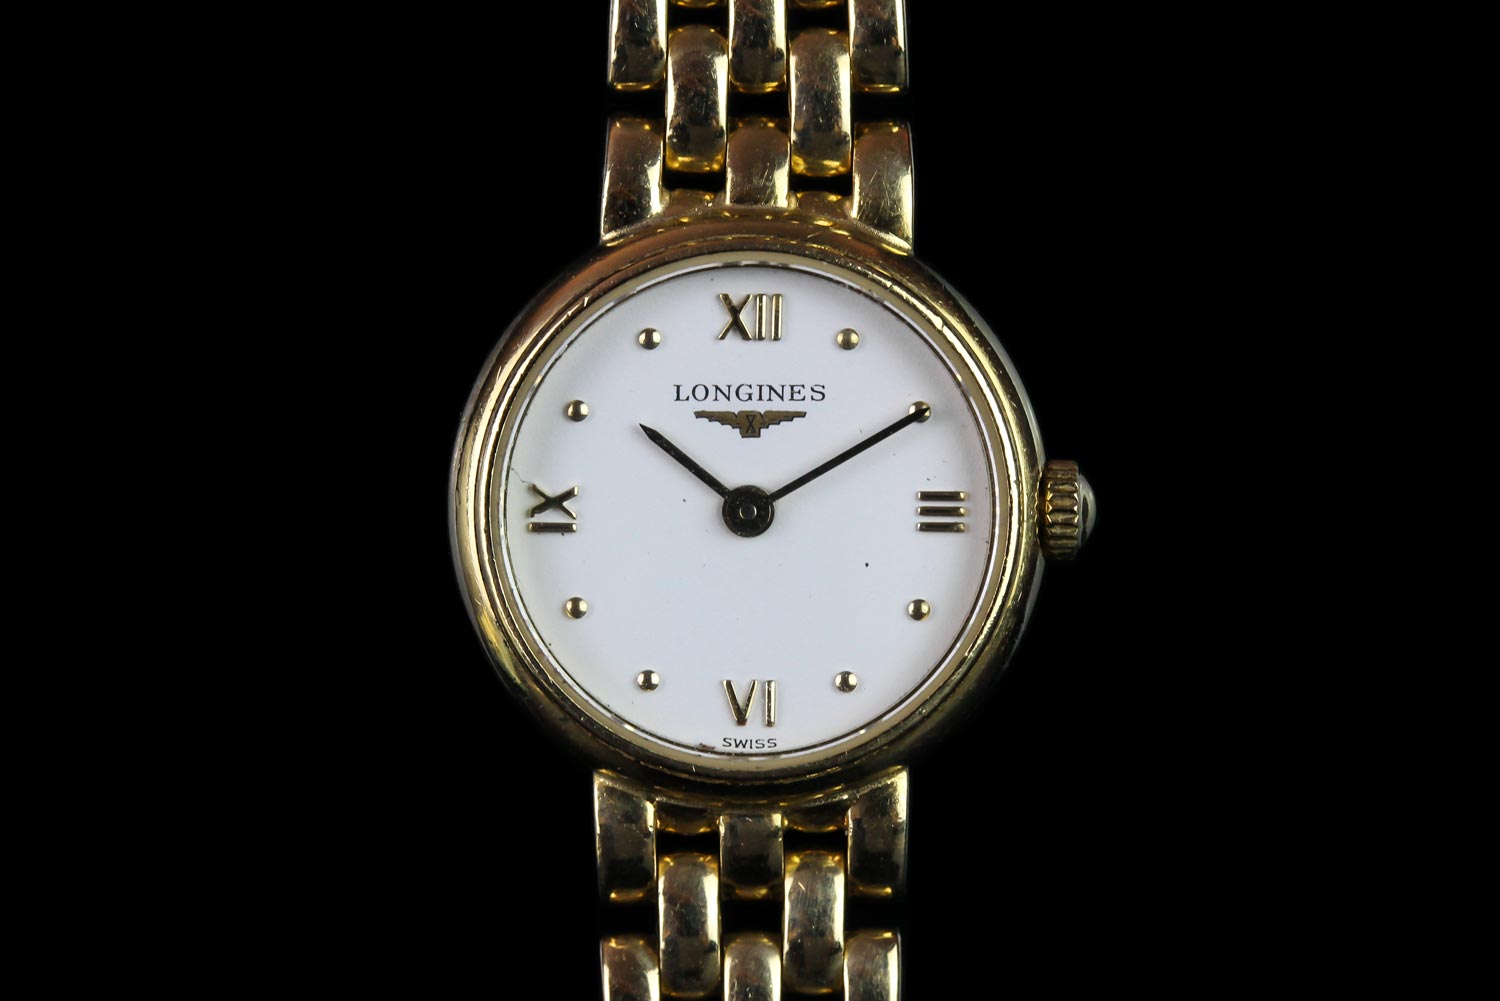 LADIES 18CT LONGINES DRESS WATCH REFERENCE LG.107.6, circular white dial, dot and Roman numeral hour